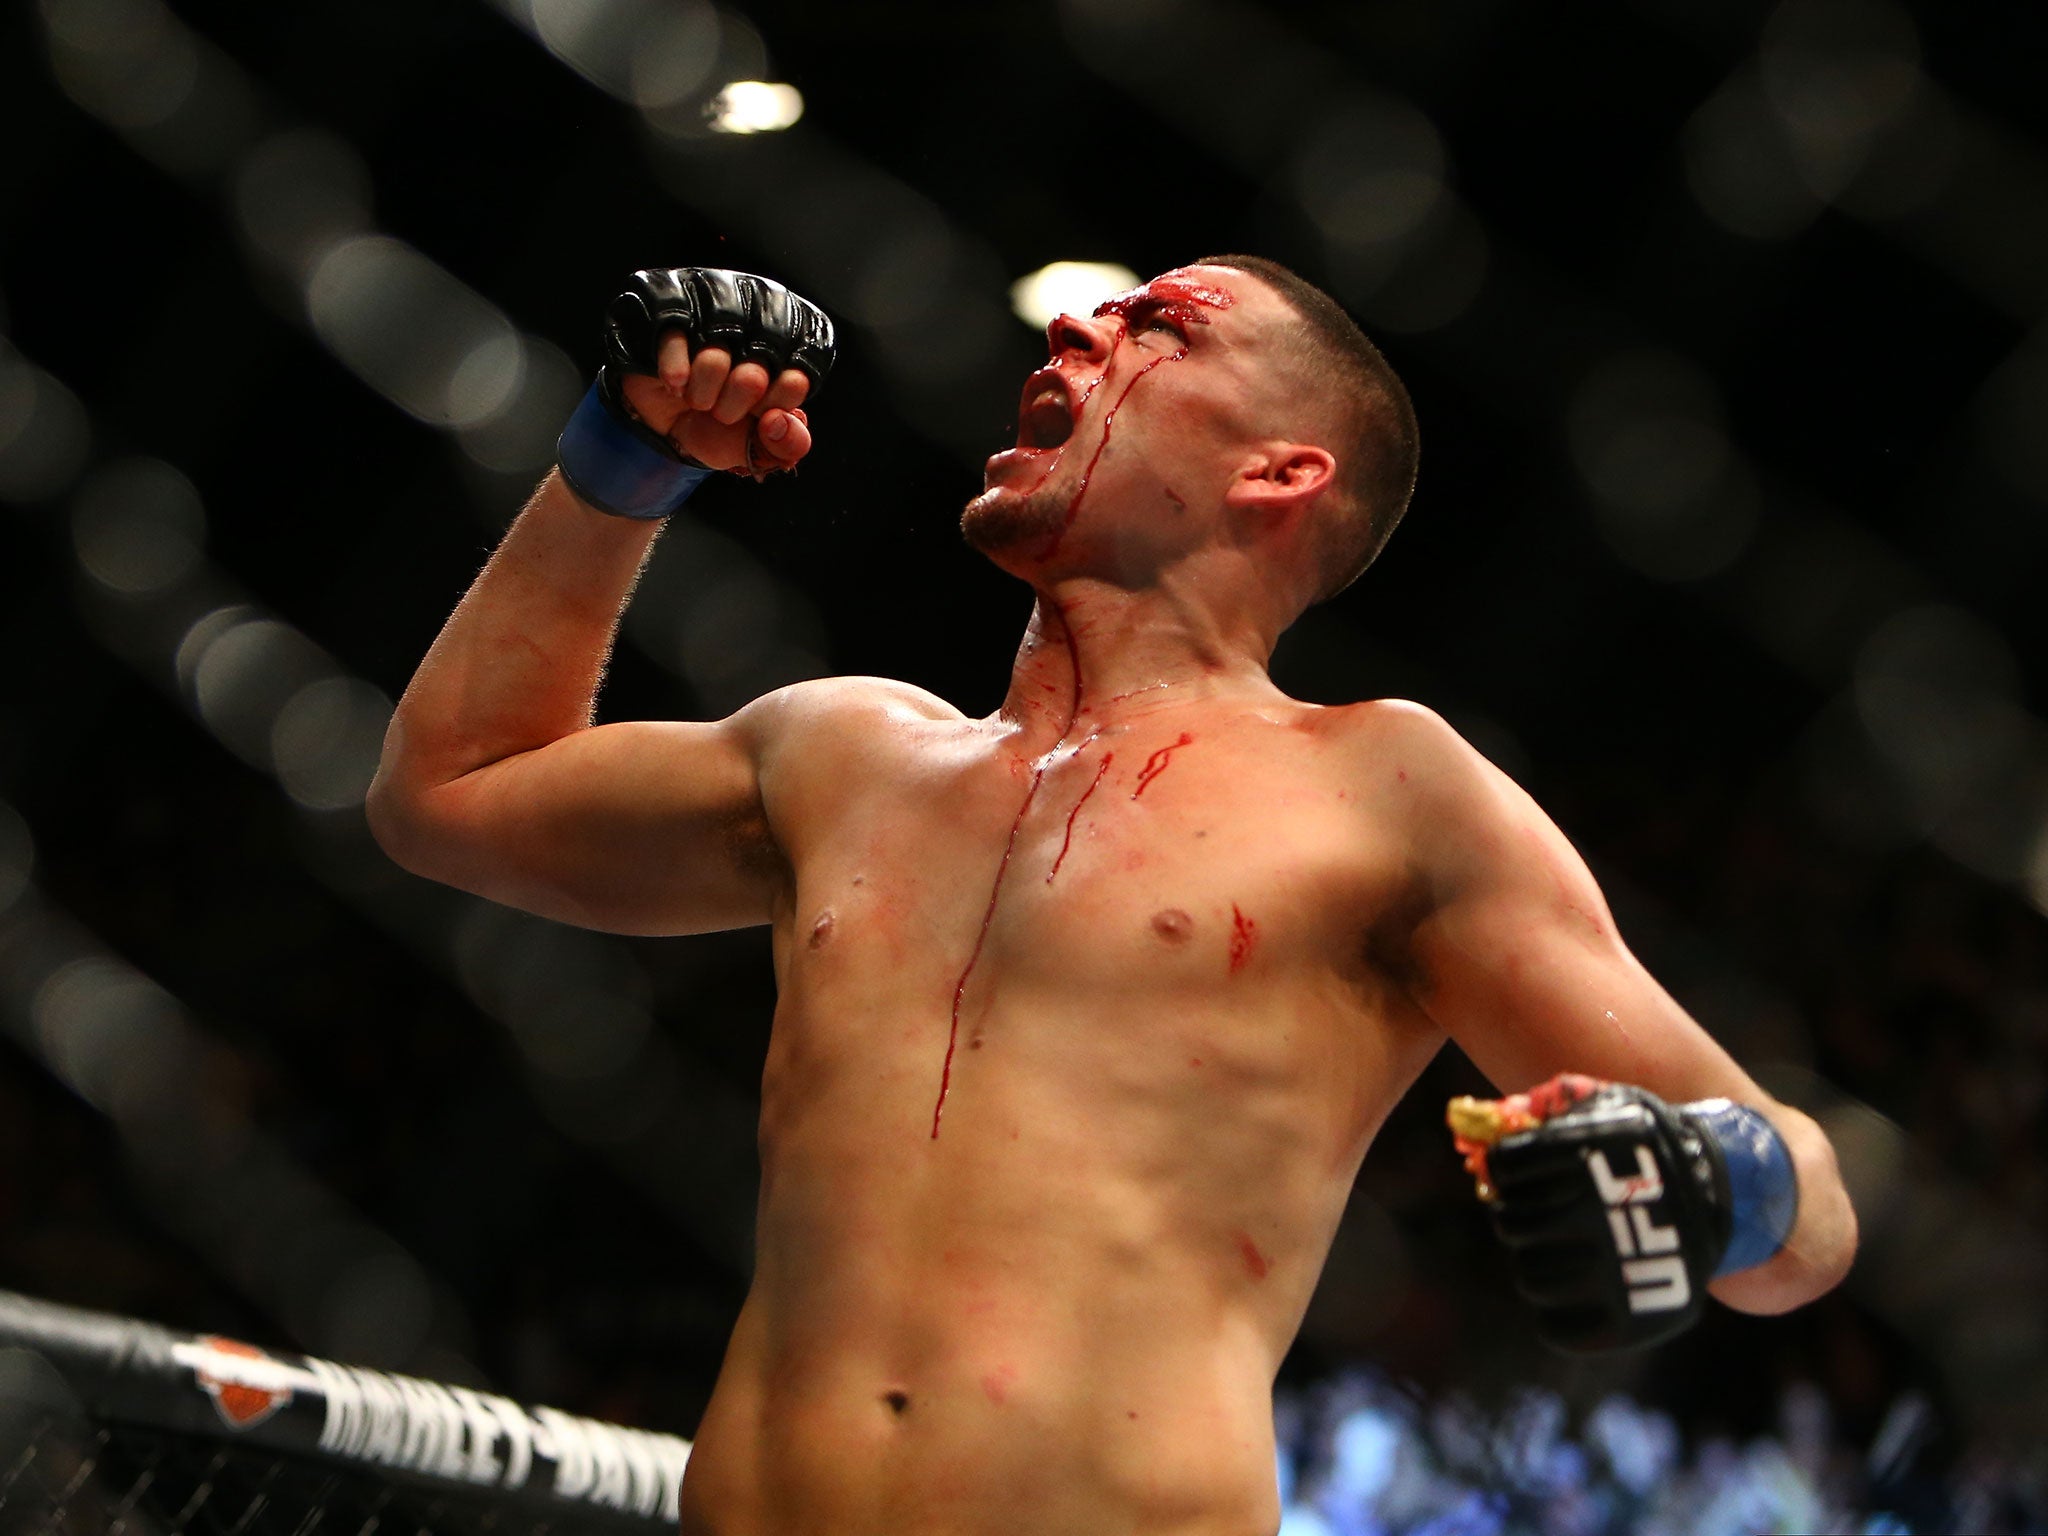 Nate Diaz celebrates victory over Conor McGregor by submission at UFC 196